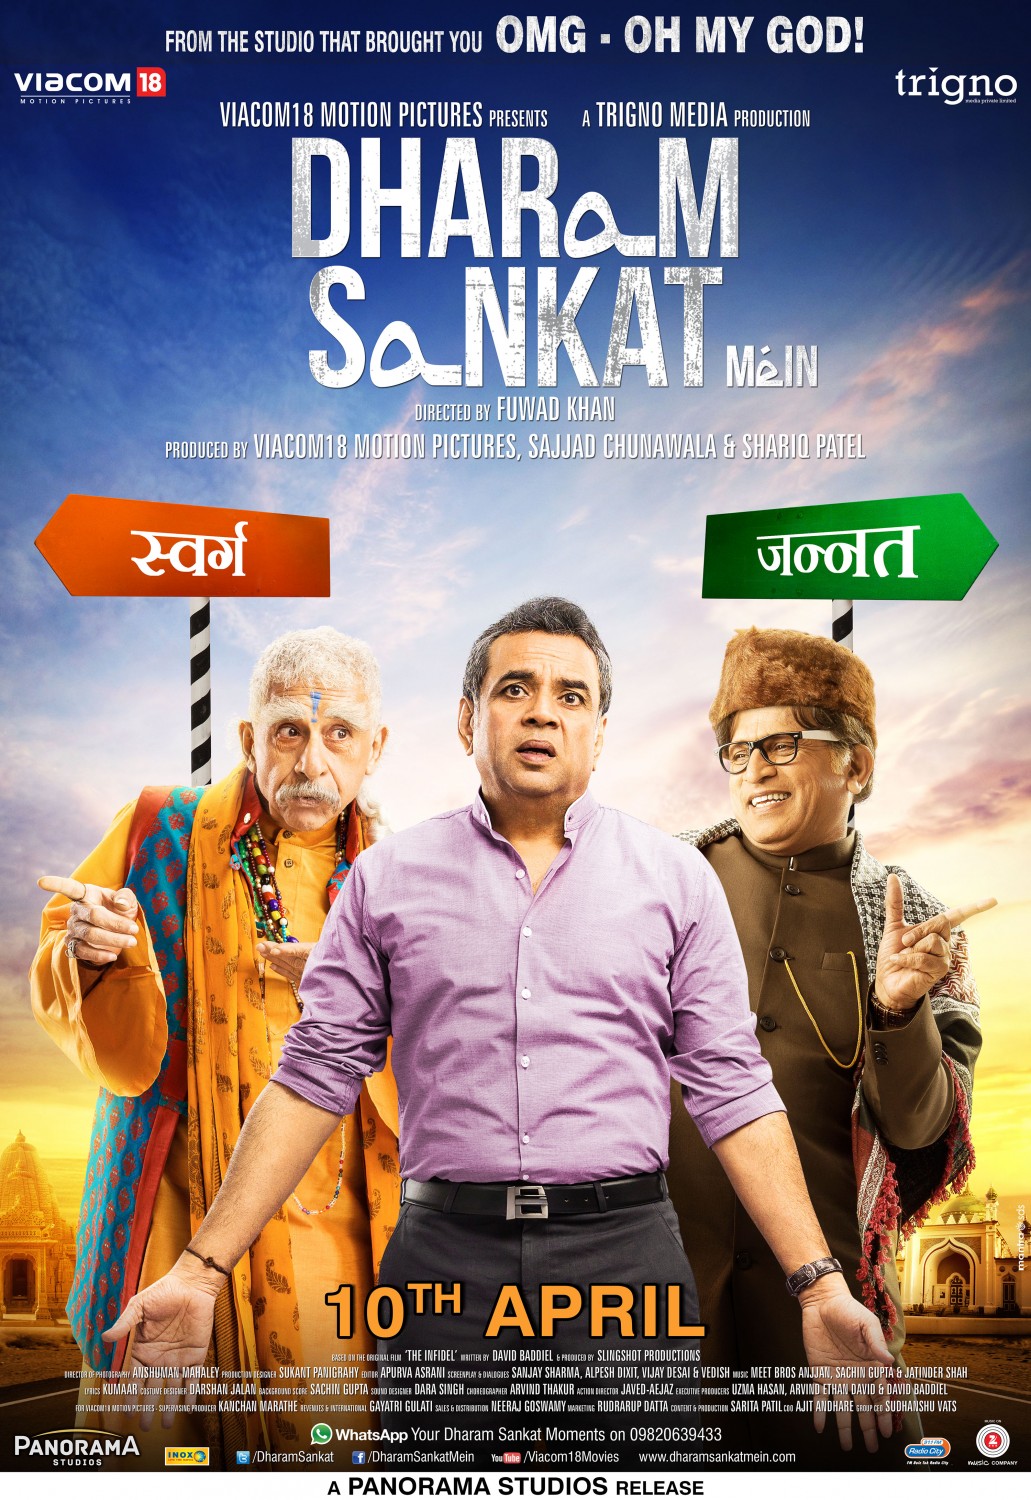 Extra Large Movie Poster Image for Dharam Sankat Mein 